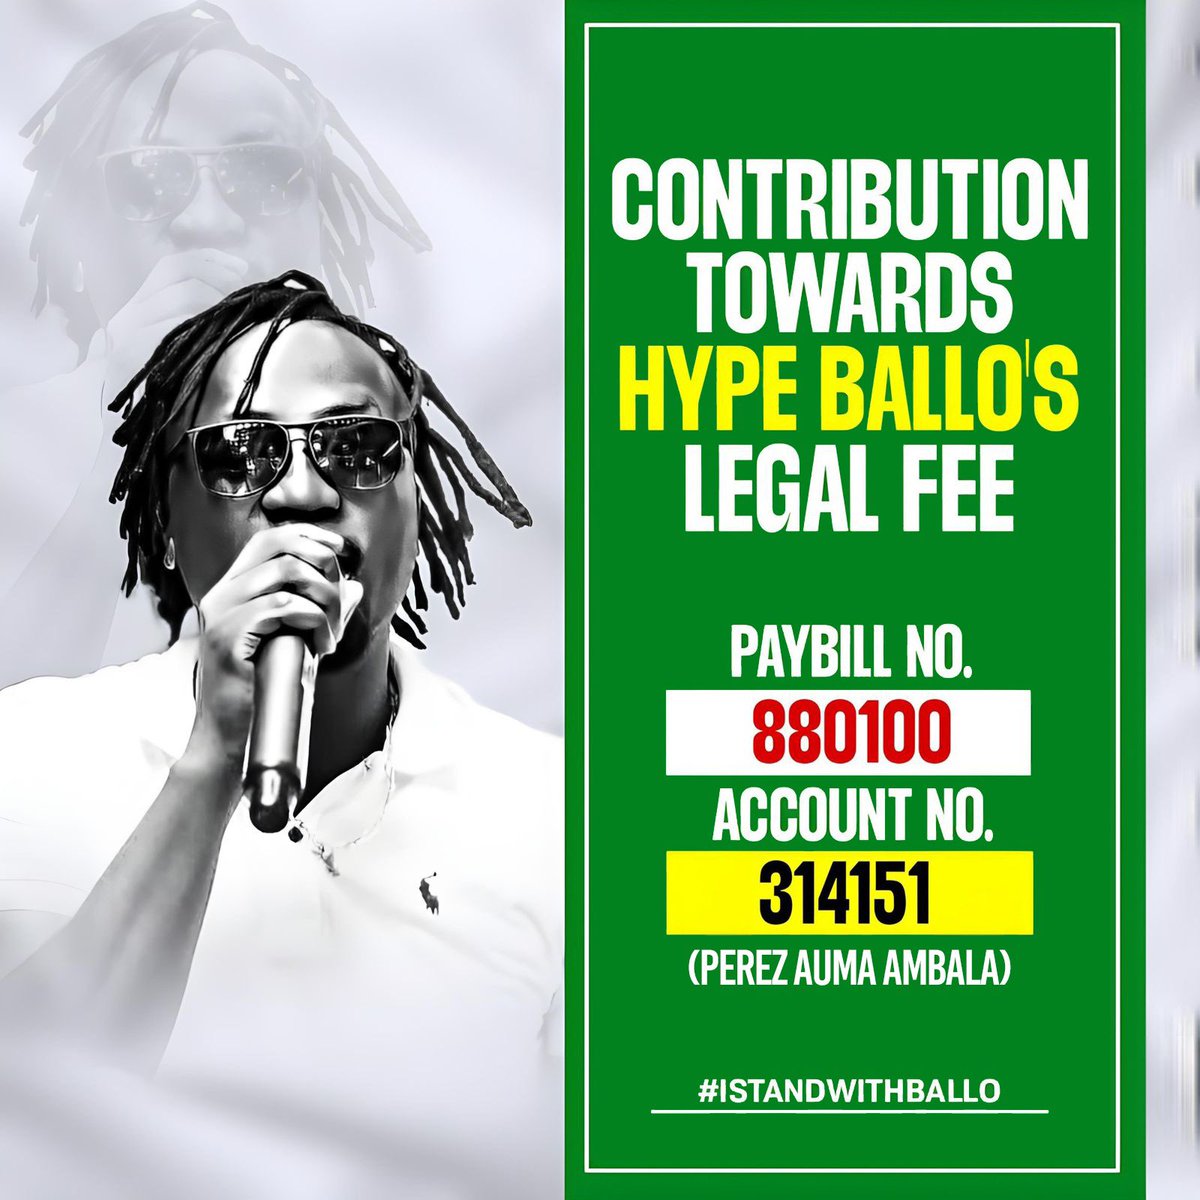 We do this for our brother @hypeballo 
Your support is highly appreciated.
#freeballo
#istandwithballo